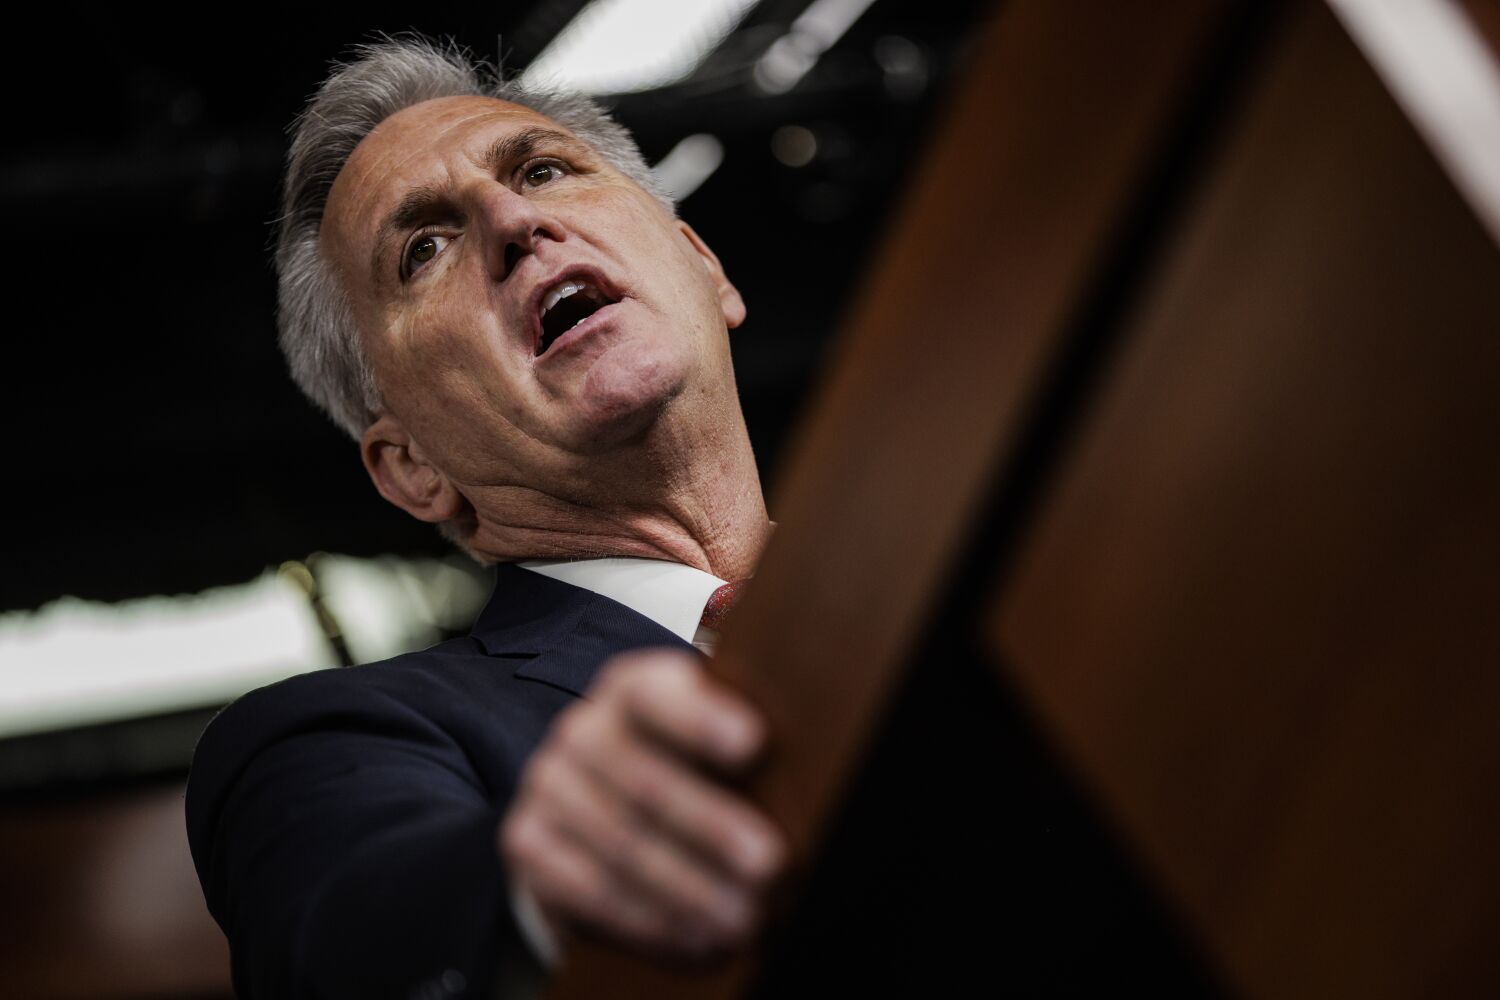 Column: Kevin McCarthy can't govern, so he resorts to cynical stunts like reading the Constitution aloud for 43 minutes